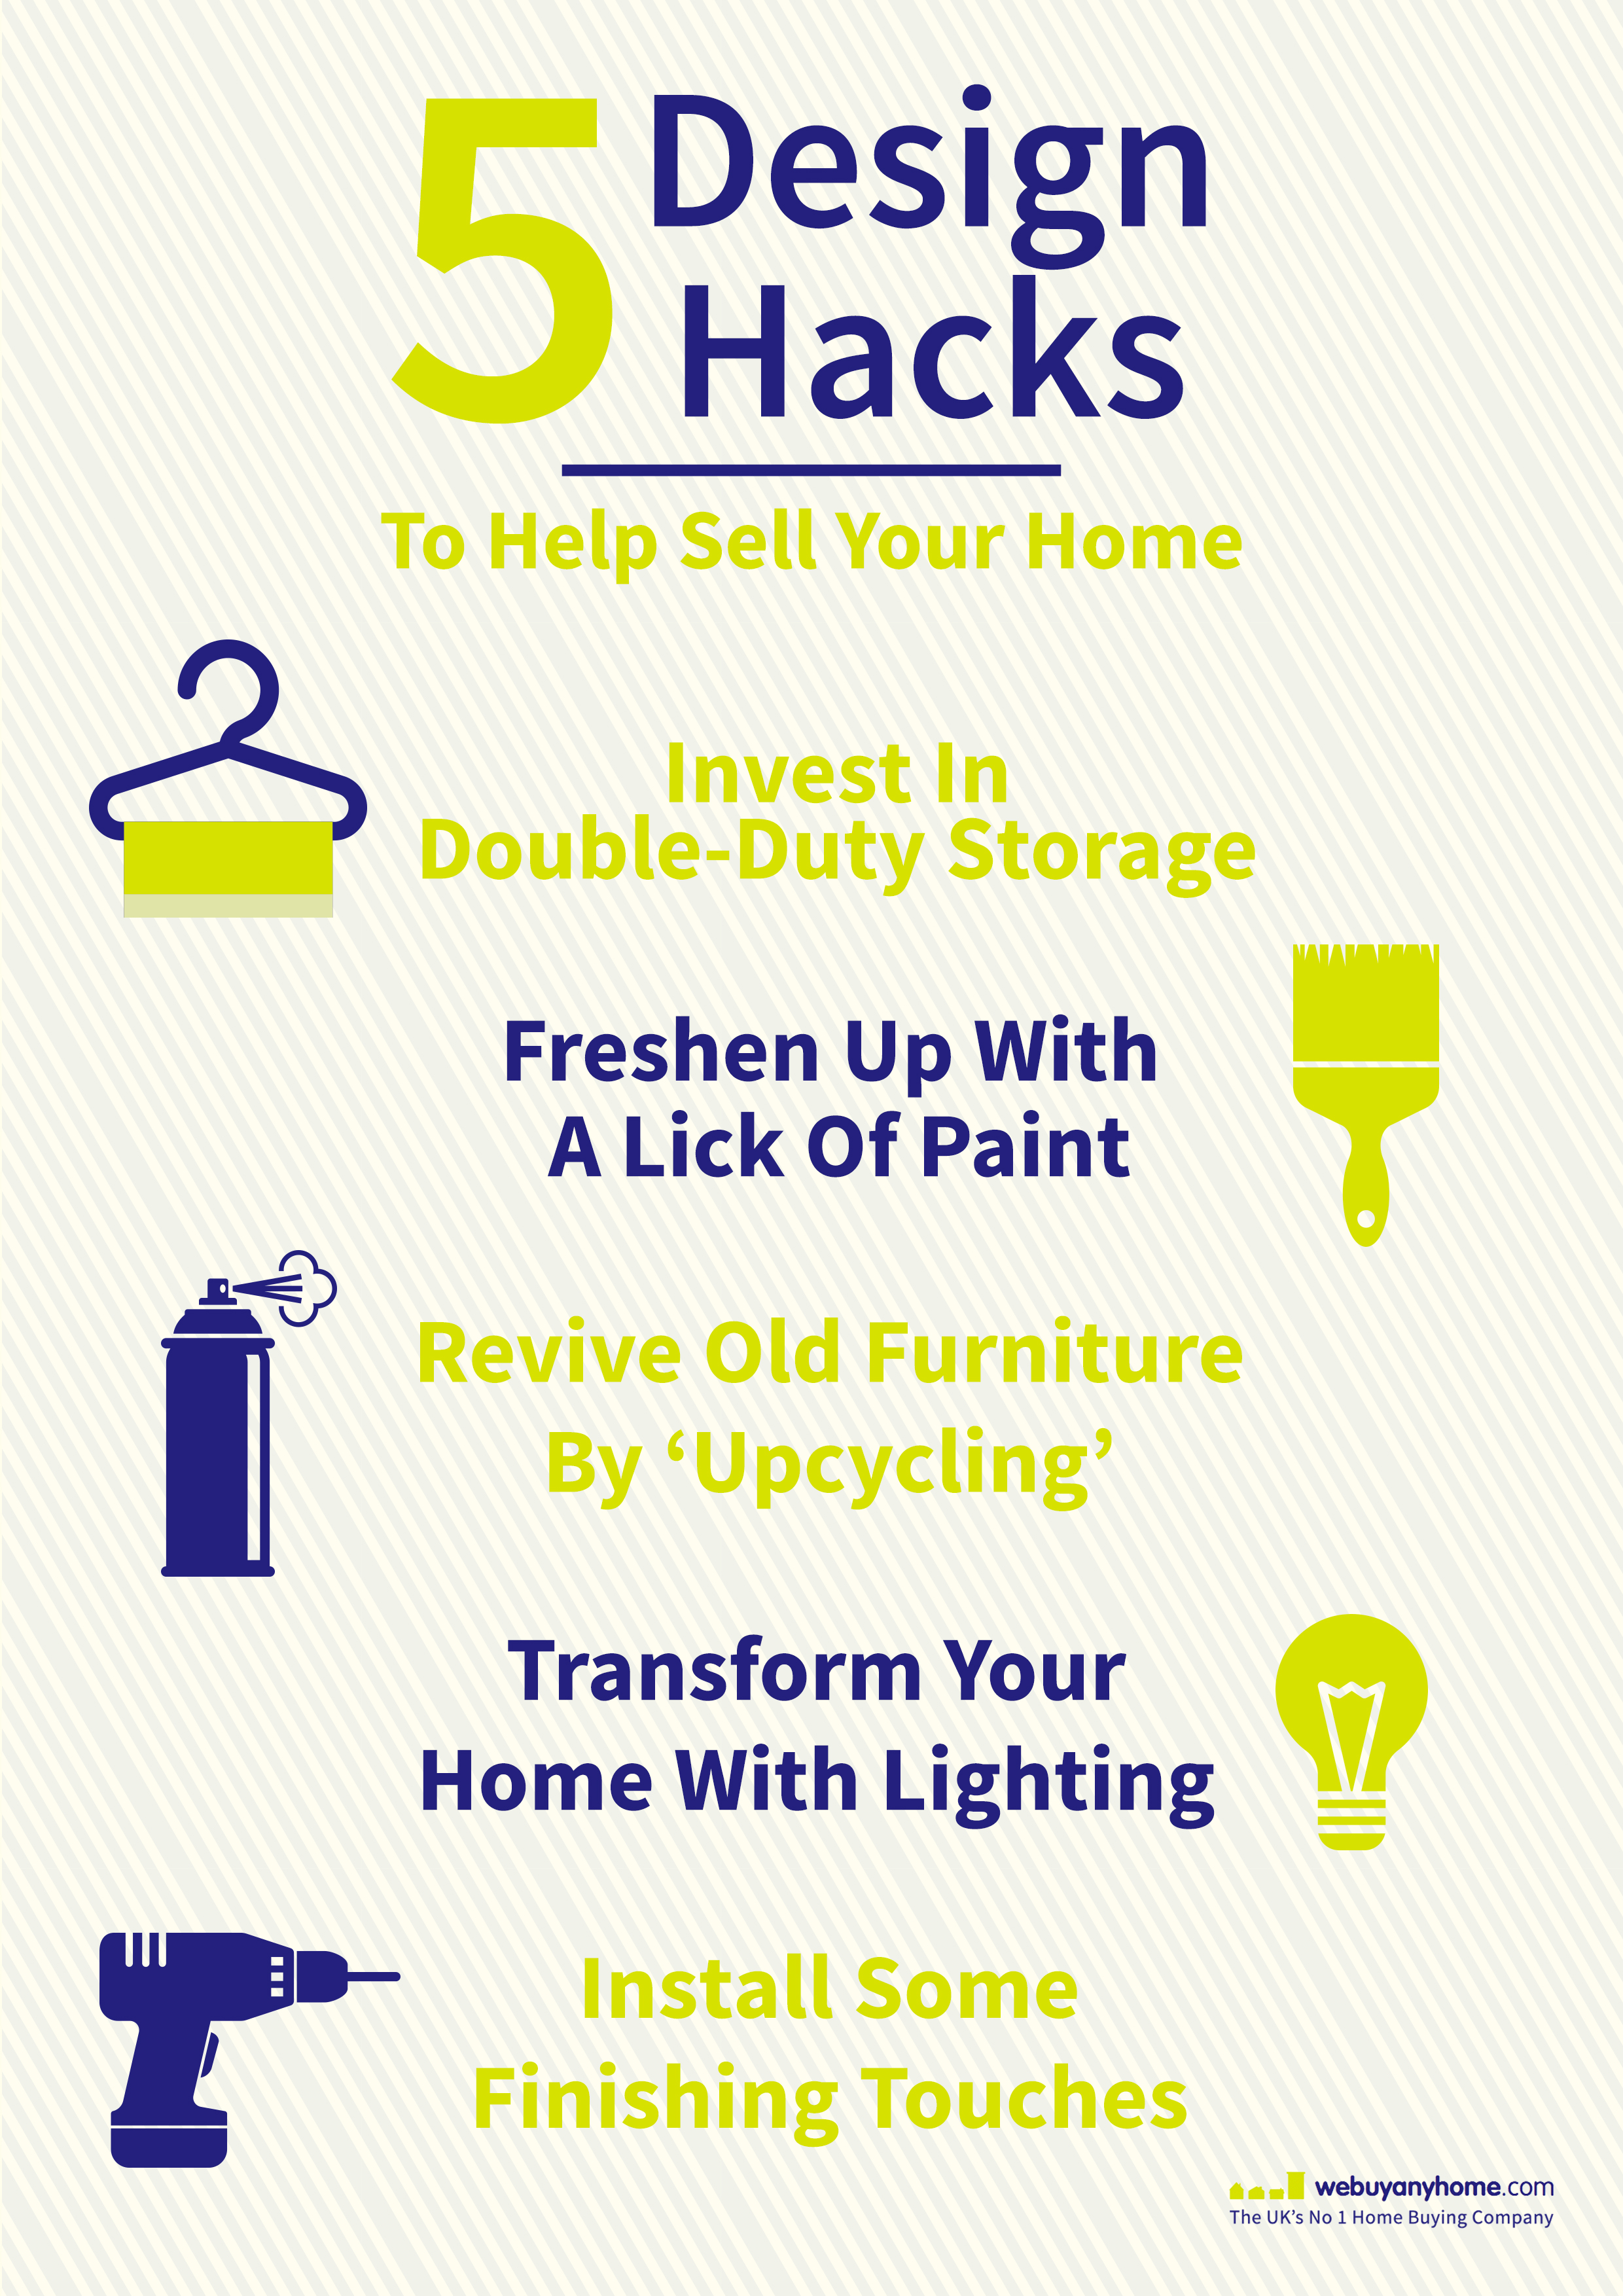 Design Tips Infographic, We Buy Any Home